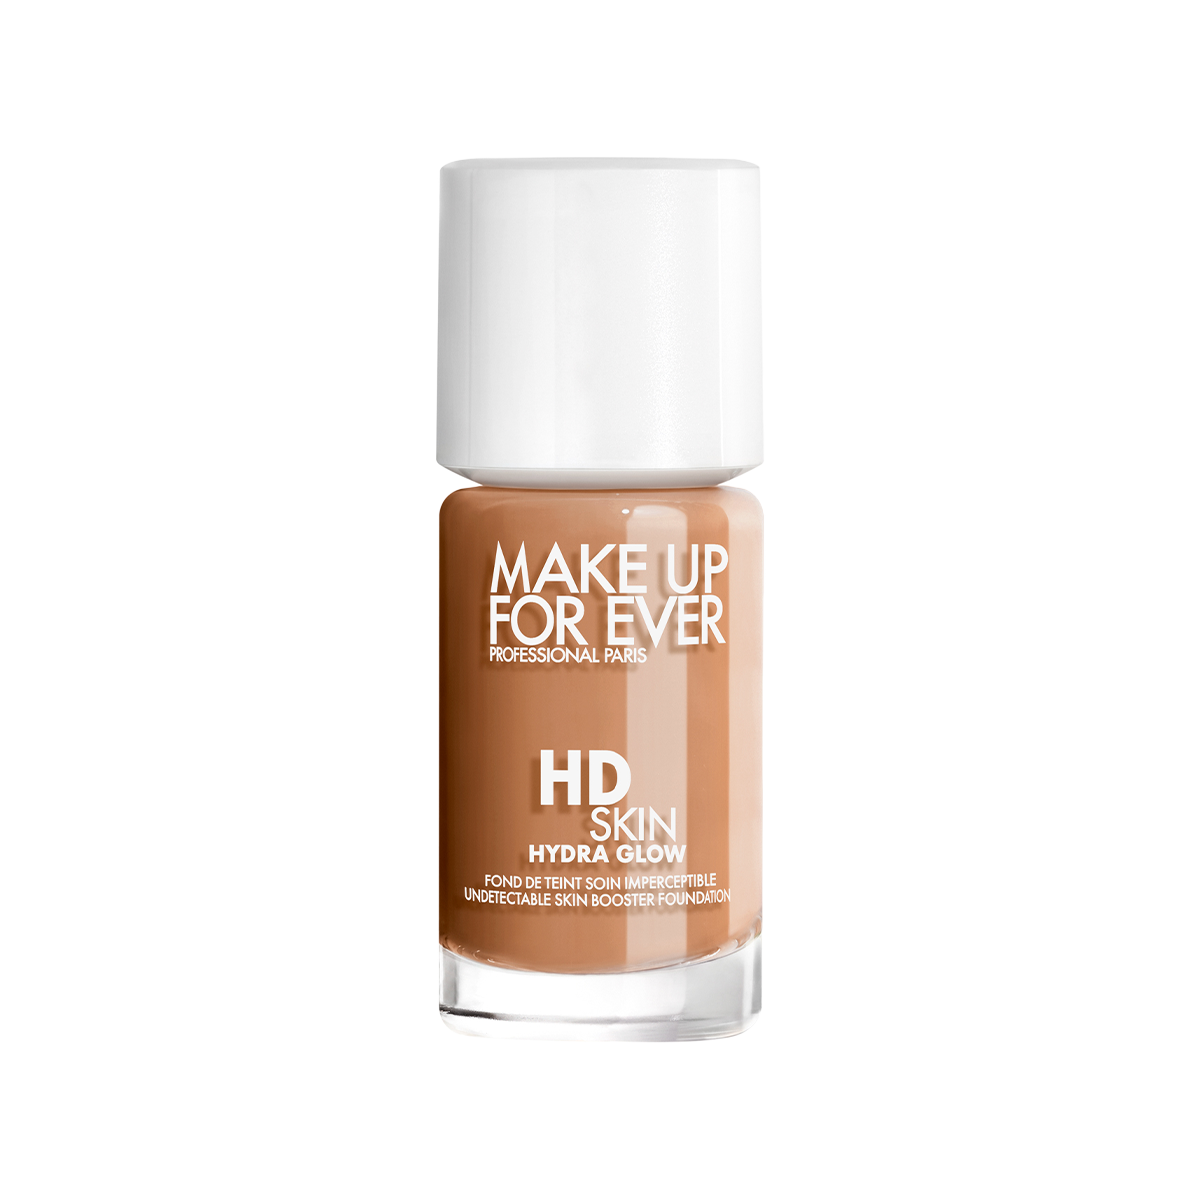 Shop Make Up For Ever Hd Skin Hydra Glow In Praline